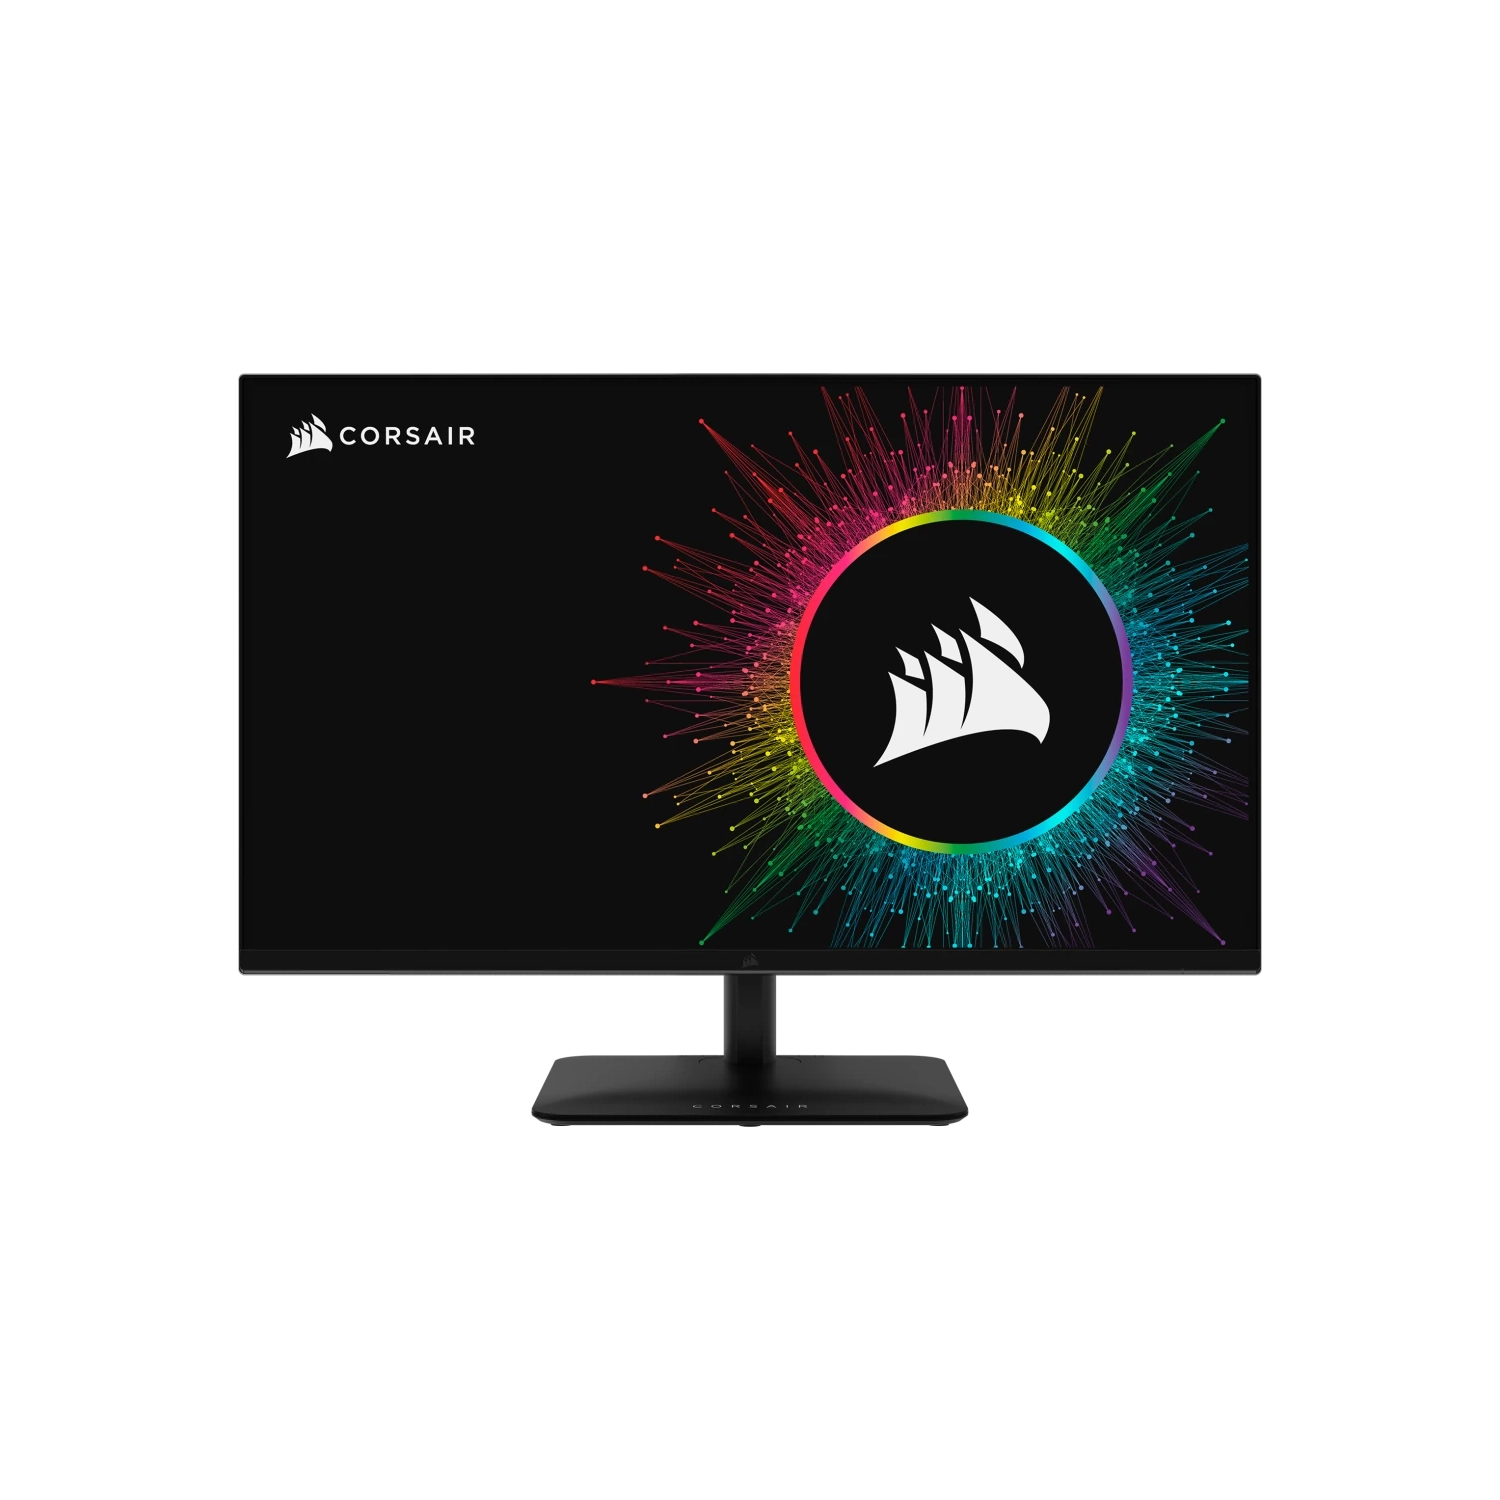 CORSAIR XENEON 32UHD144-A 32-Inch IPS UHD 4K Gaming Monitor with 144Hz Refresh Rate and 1ms Response Time